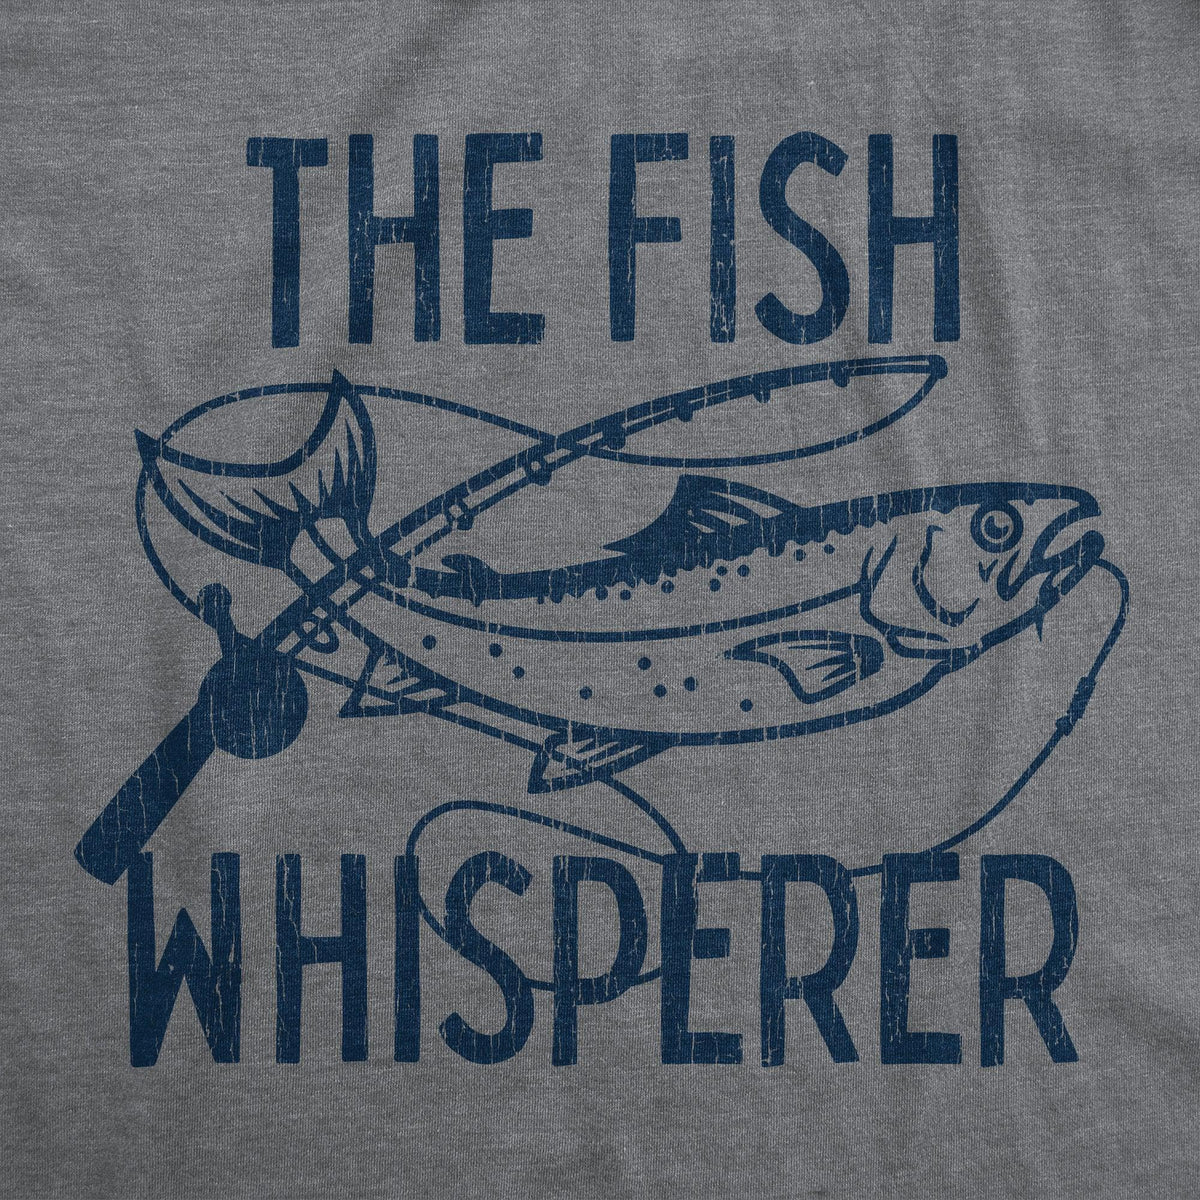 Crazy Dog T-shirts Mens The Fish Whisperer Tshirt Funny Fishing Lake Time Graphic Novelty Tee Graphic Tees, Men's, Size: Small, Gray